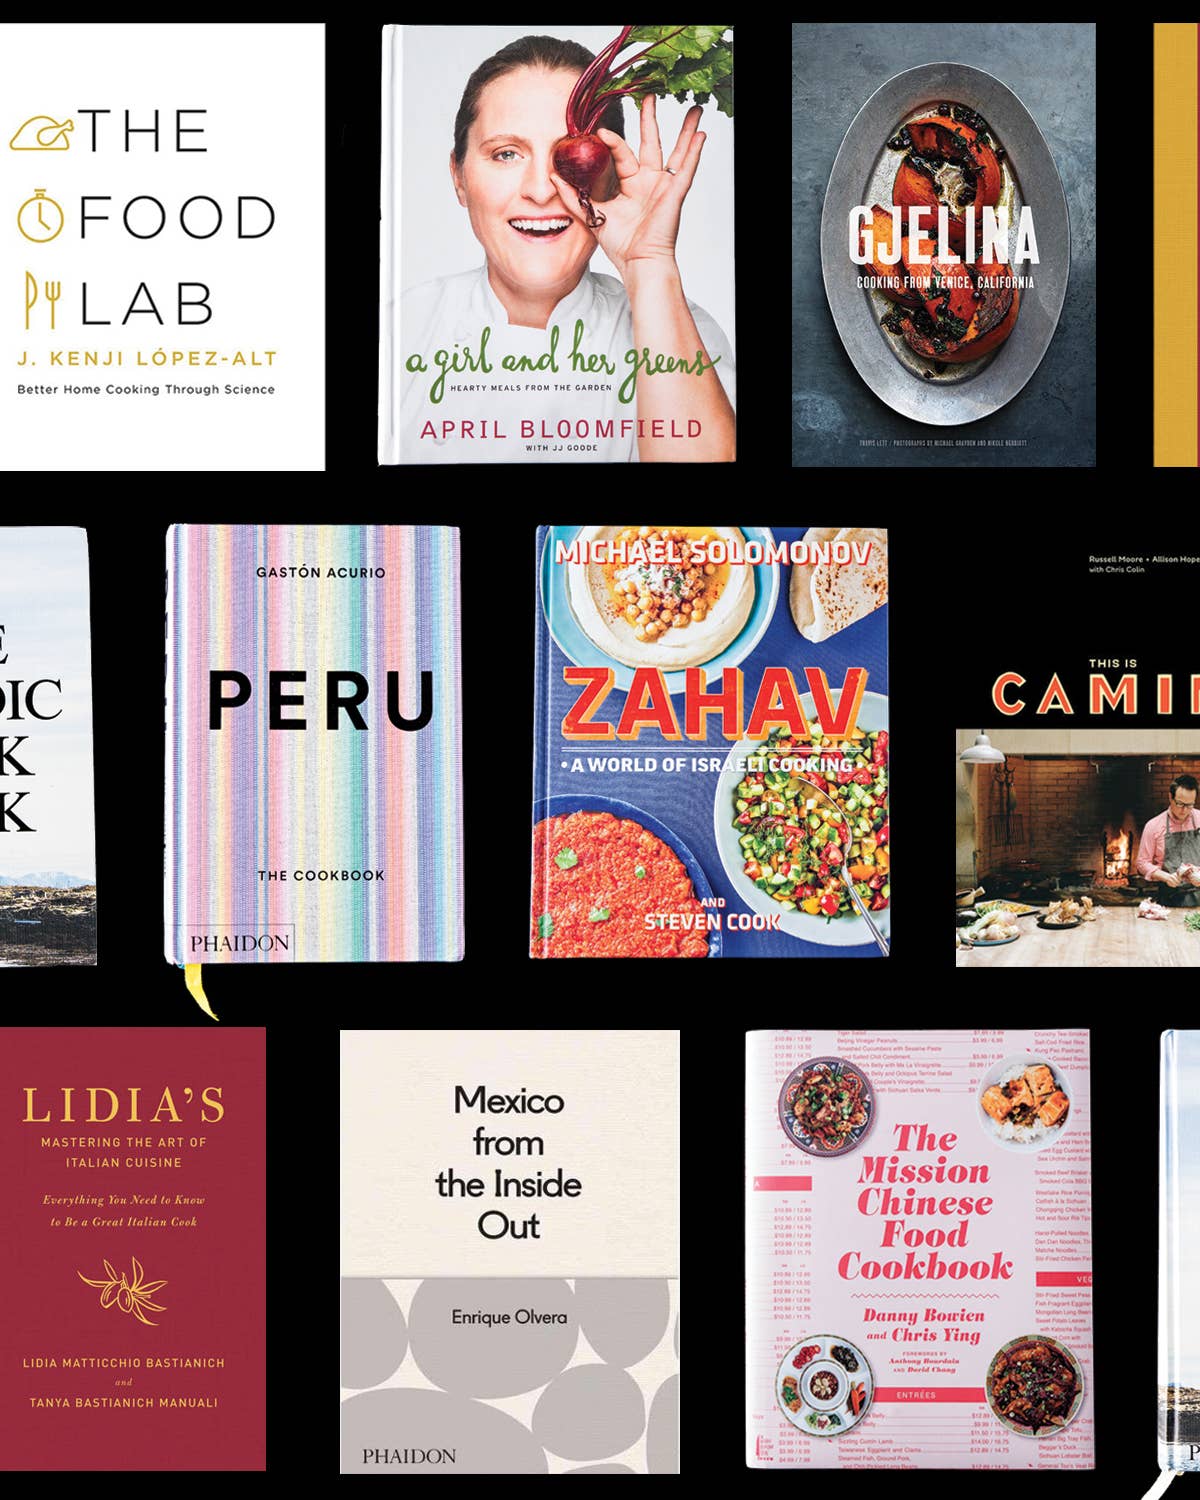 Join SAVEUR’s Cookbook Club Today and Cook With Us Through Our Favorite Books